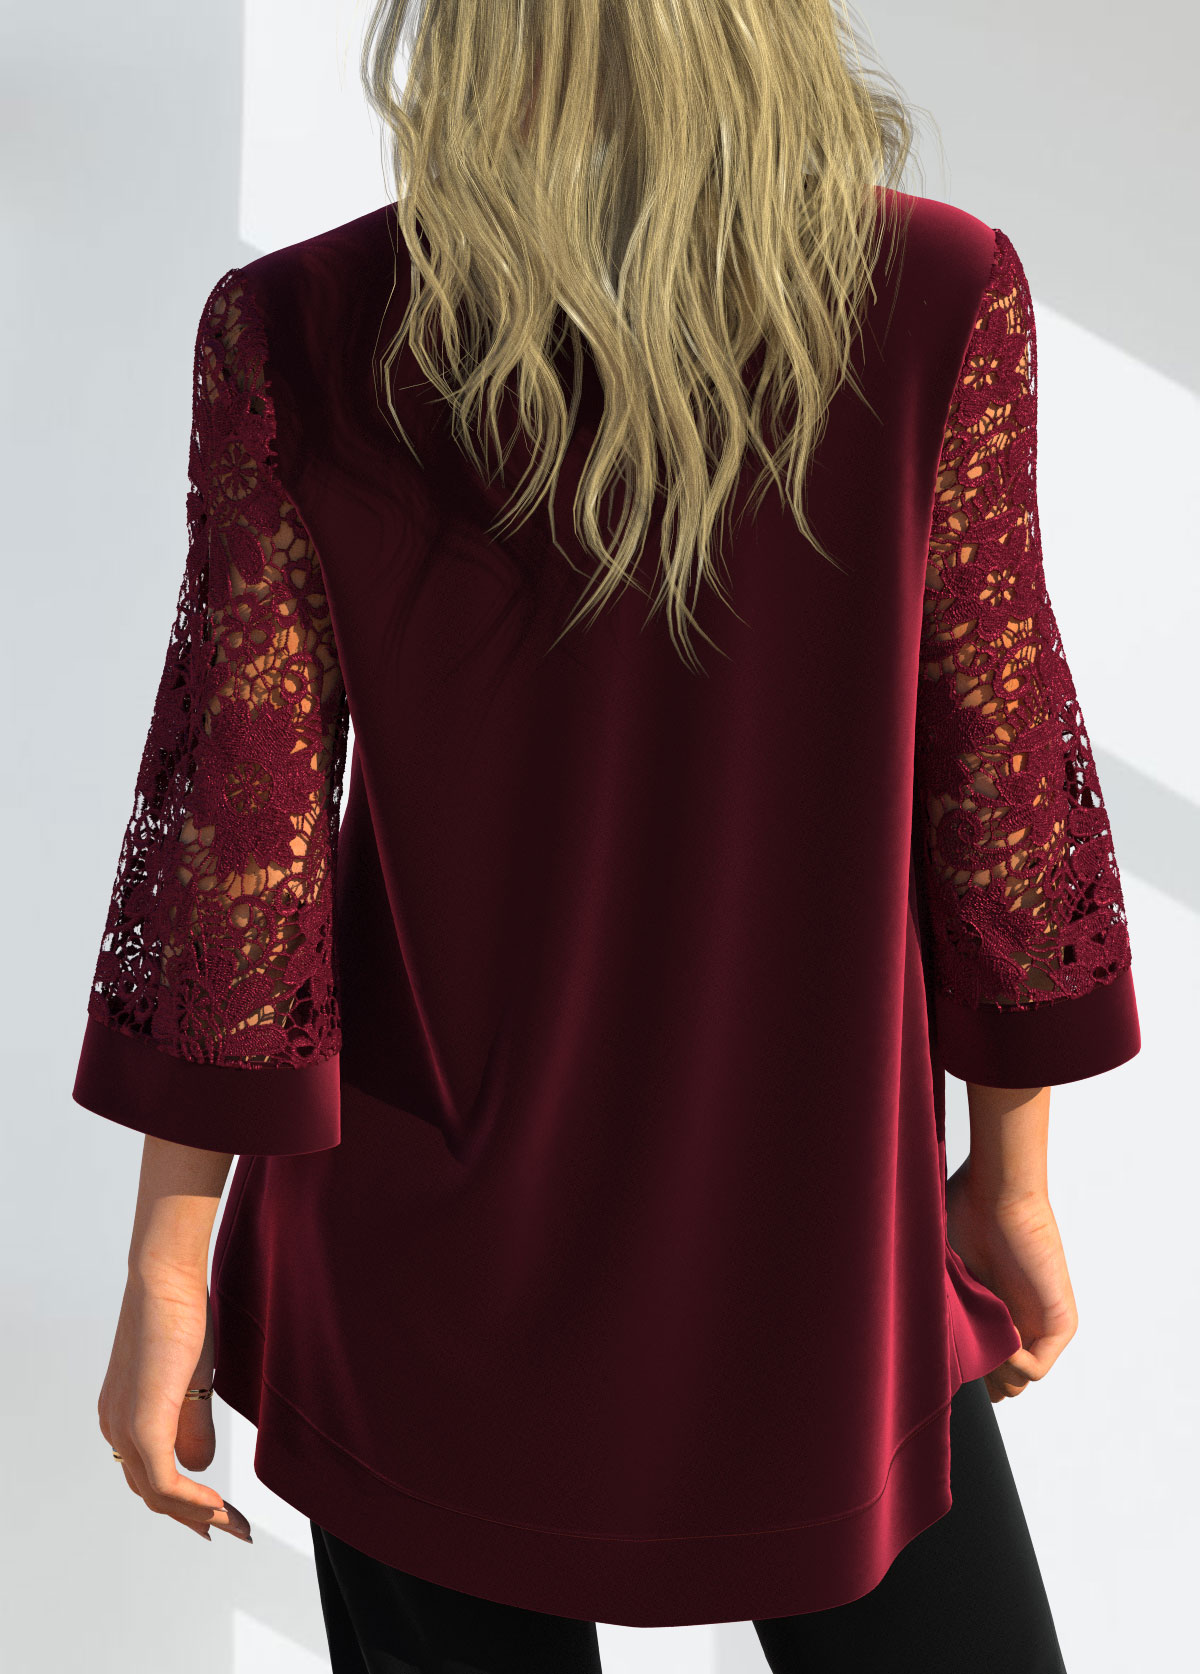 Lace Stitching 3/4 Sleeve Red Coat and Camisole Top